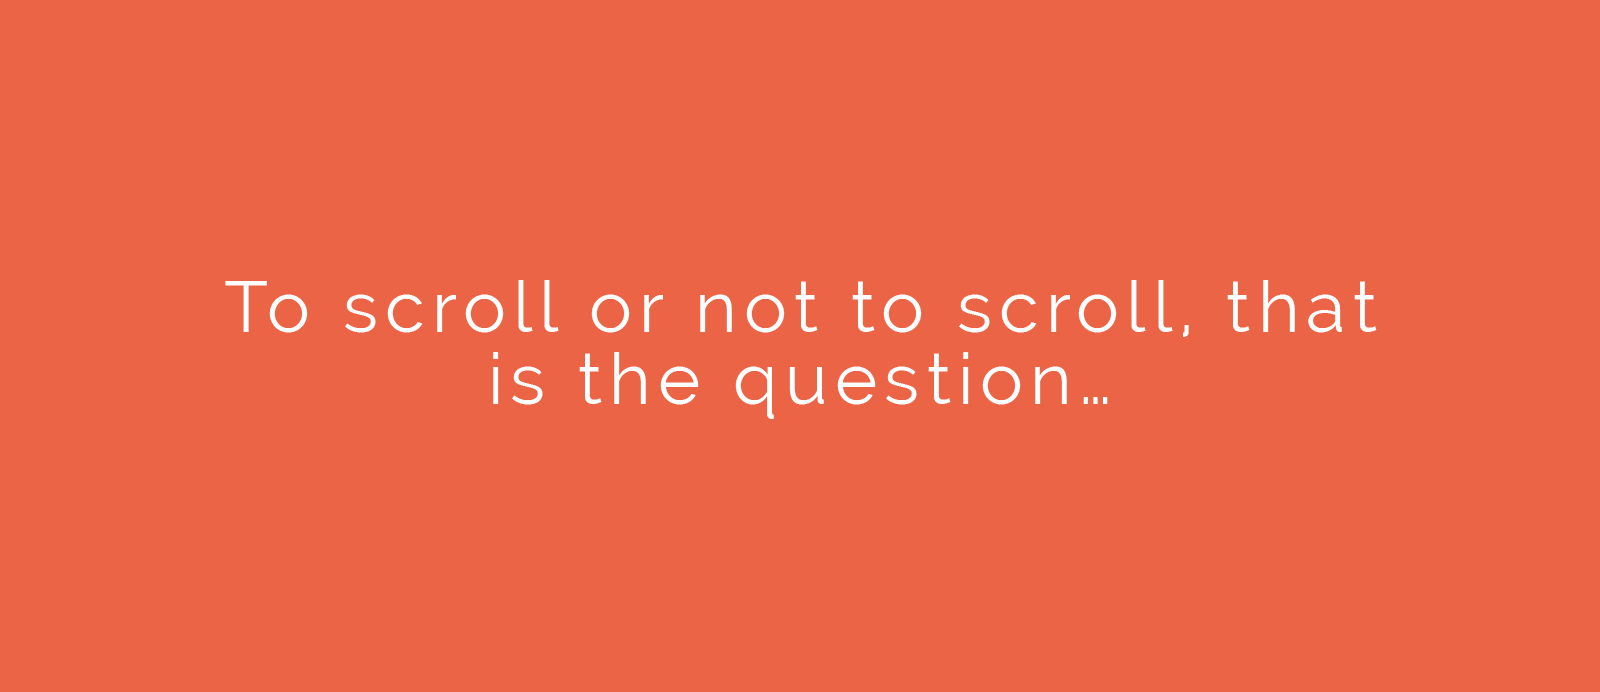 To scroll or not to scroll, that is the question…